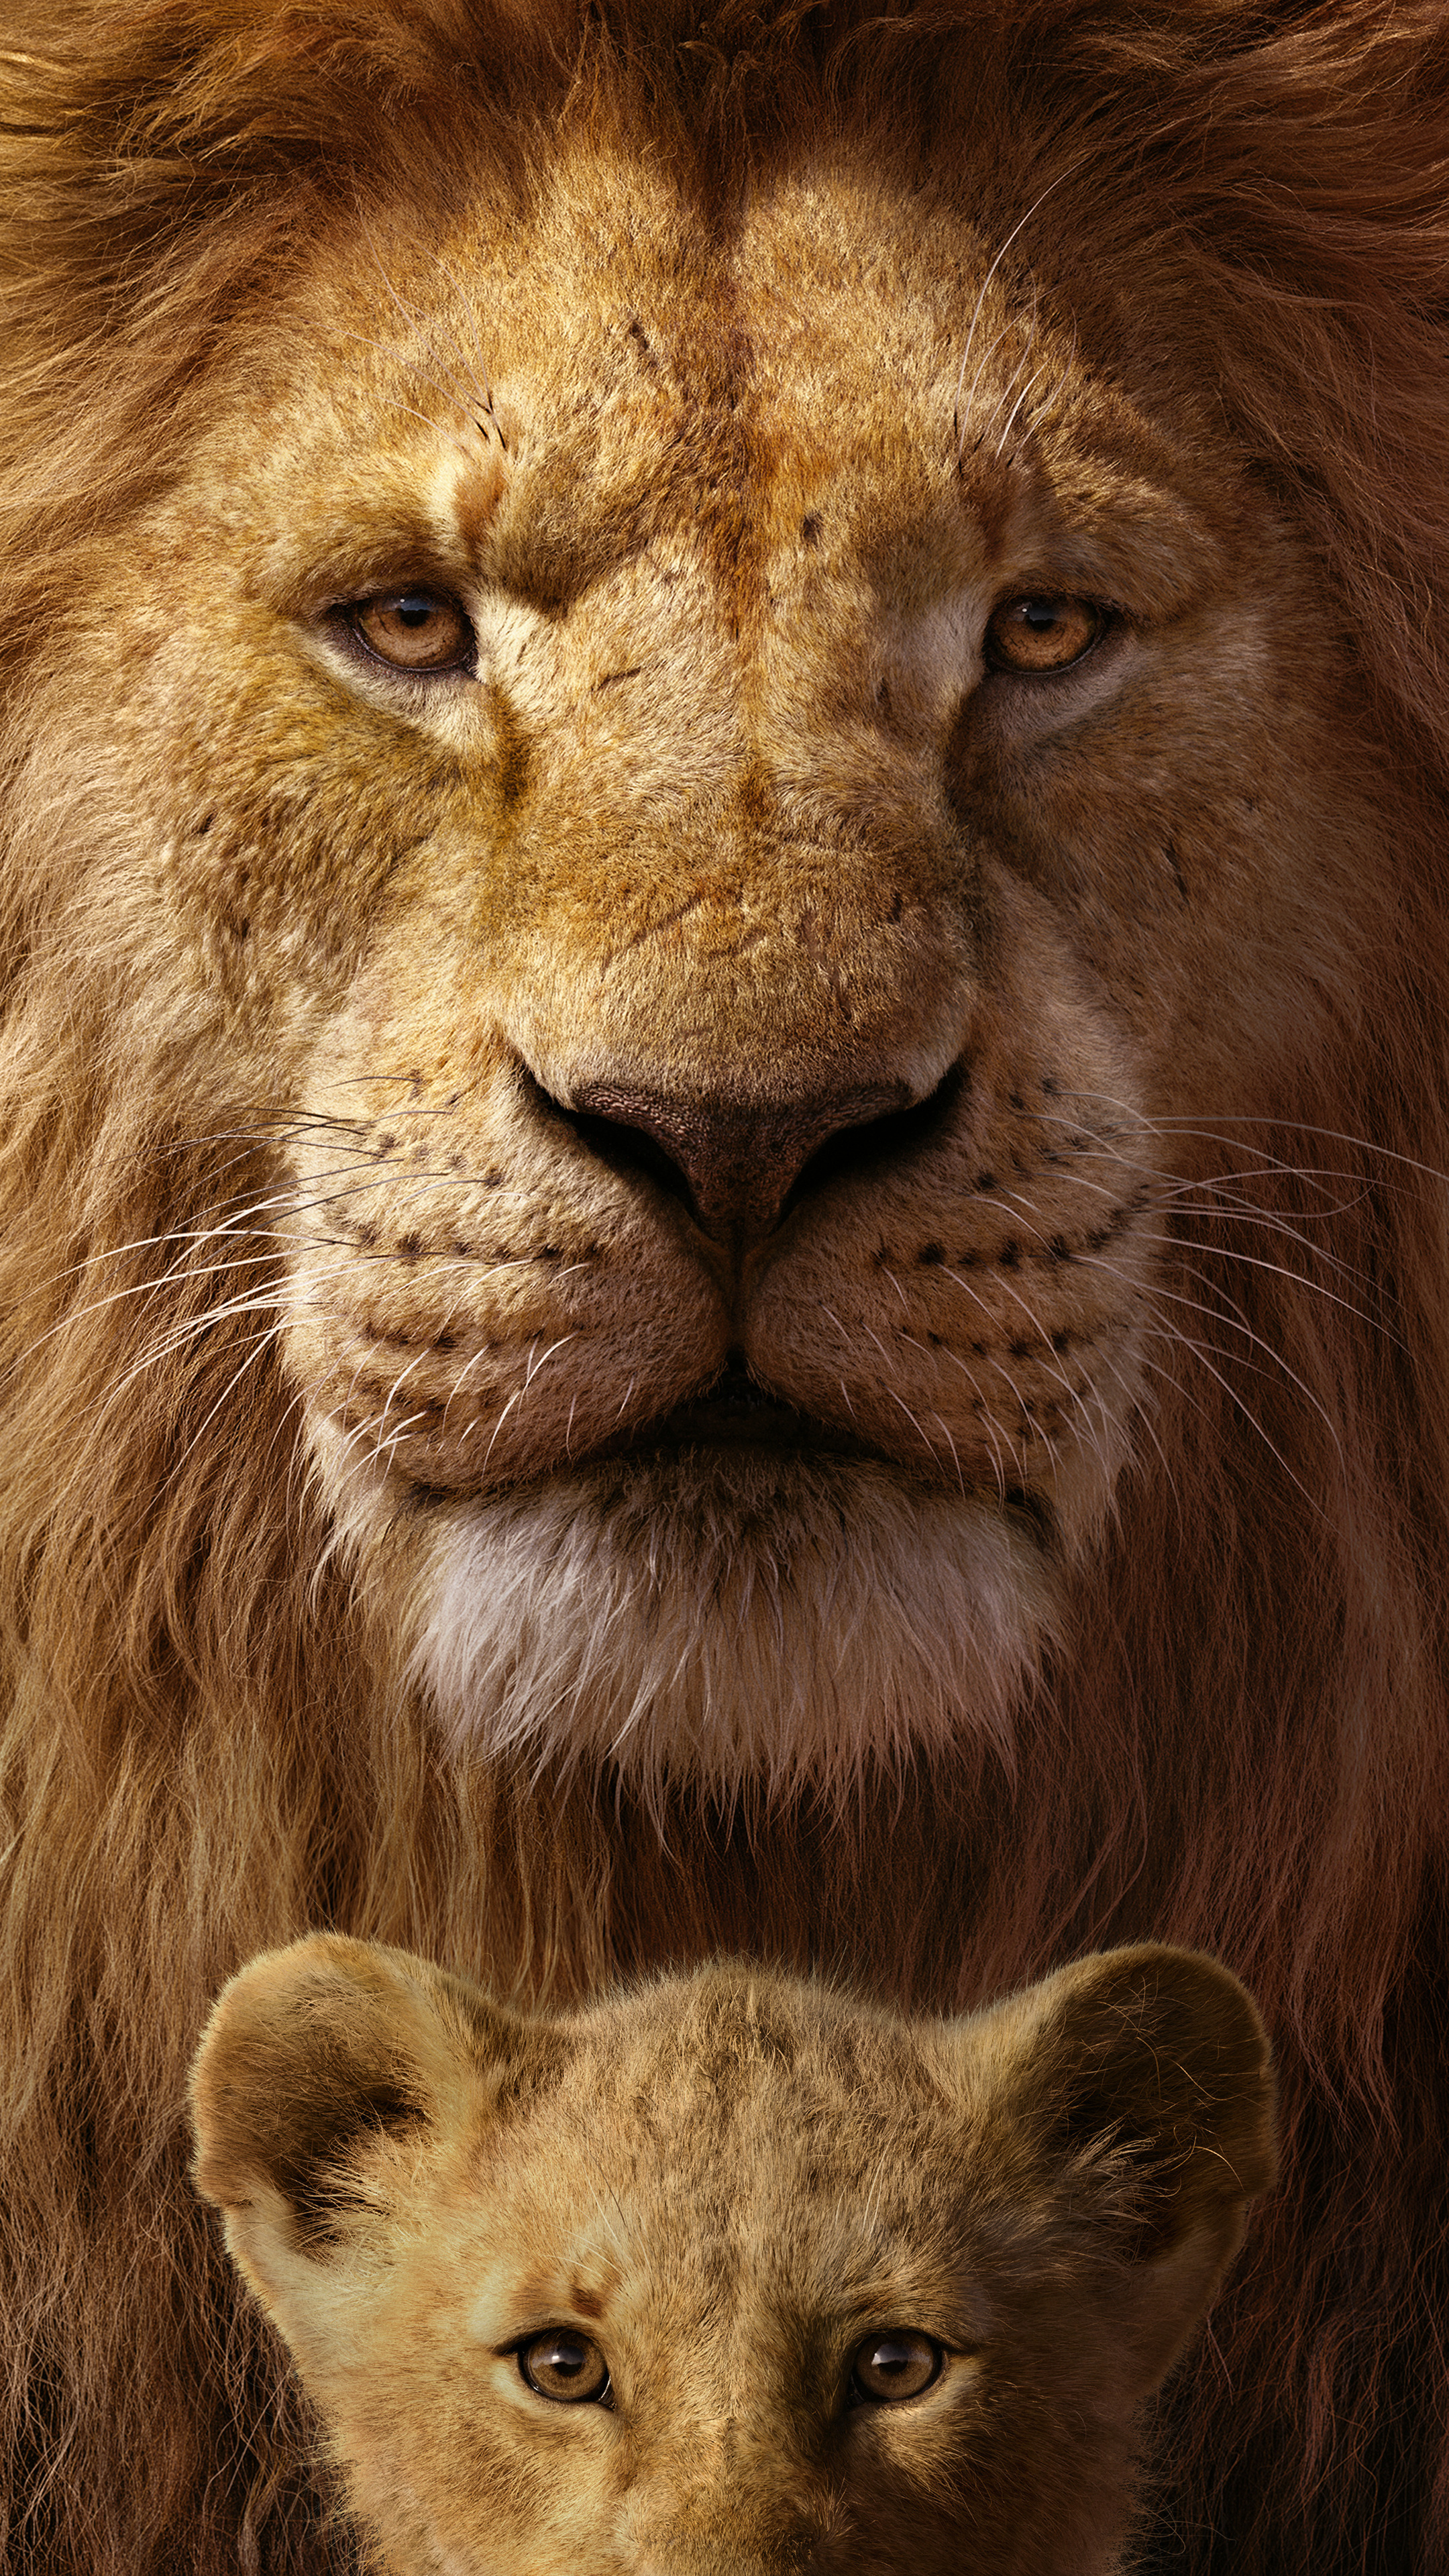 The Lion King, Breathtaking 8K quality, Sony Xperia X, Majestic visuals, 2160x3840 4K Phone